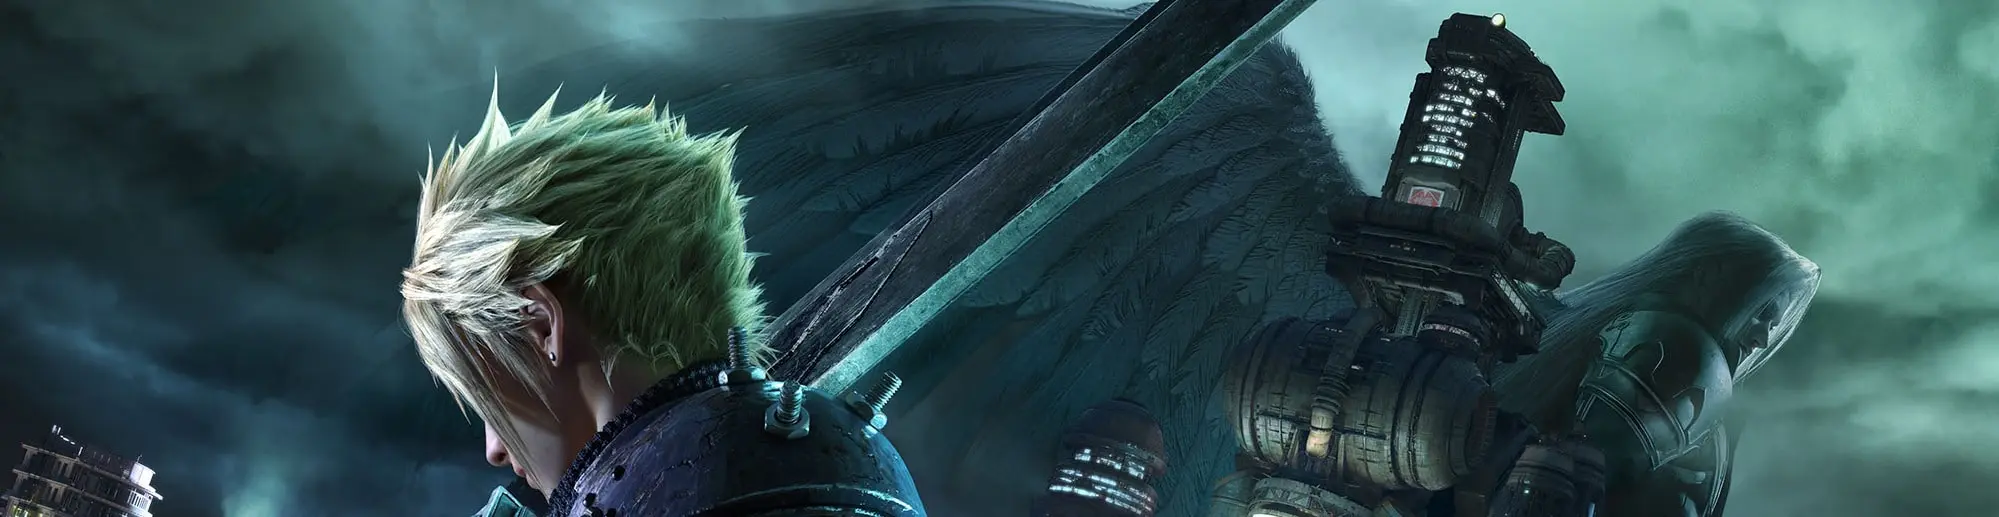 THE REBOOT OF A BELOVED CLASSIC: FINAL FANTASY VII REMAKE ARRIVES FEATURING CONTRIBUTIONS BY VIRTUOS ART